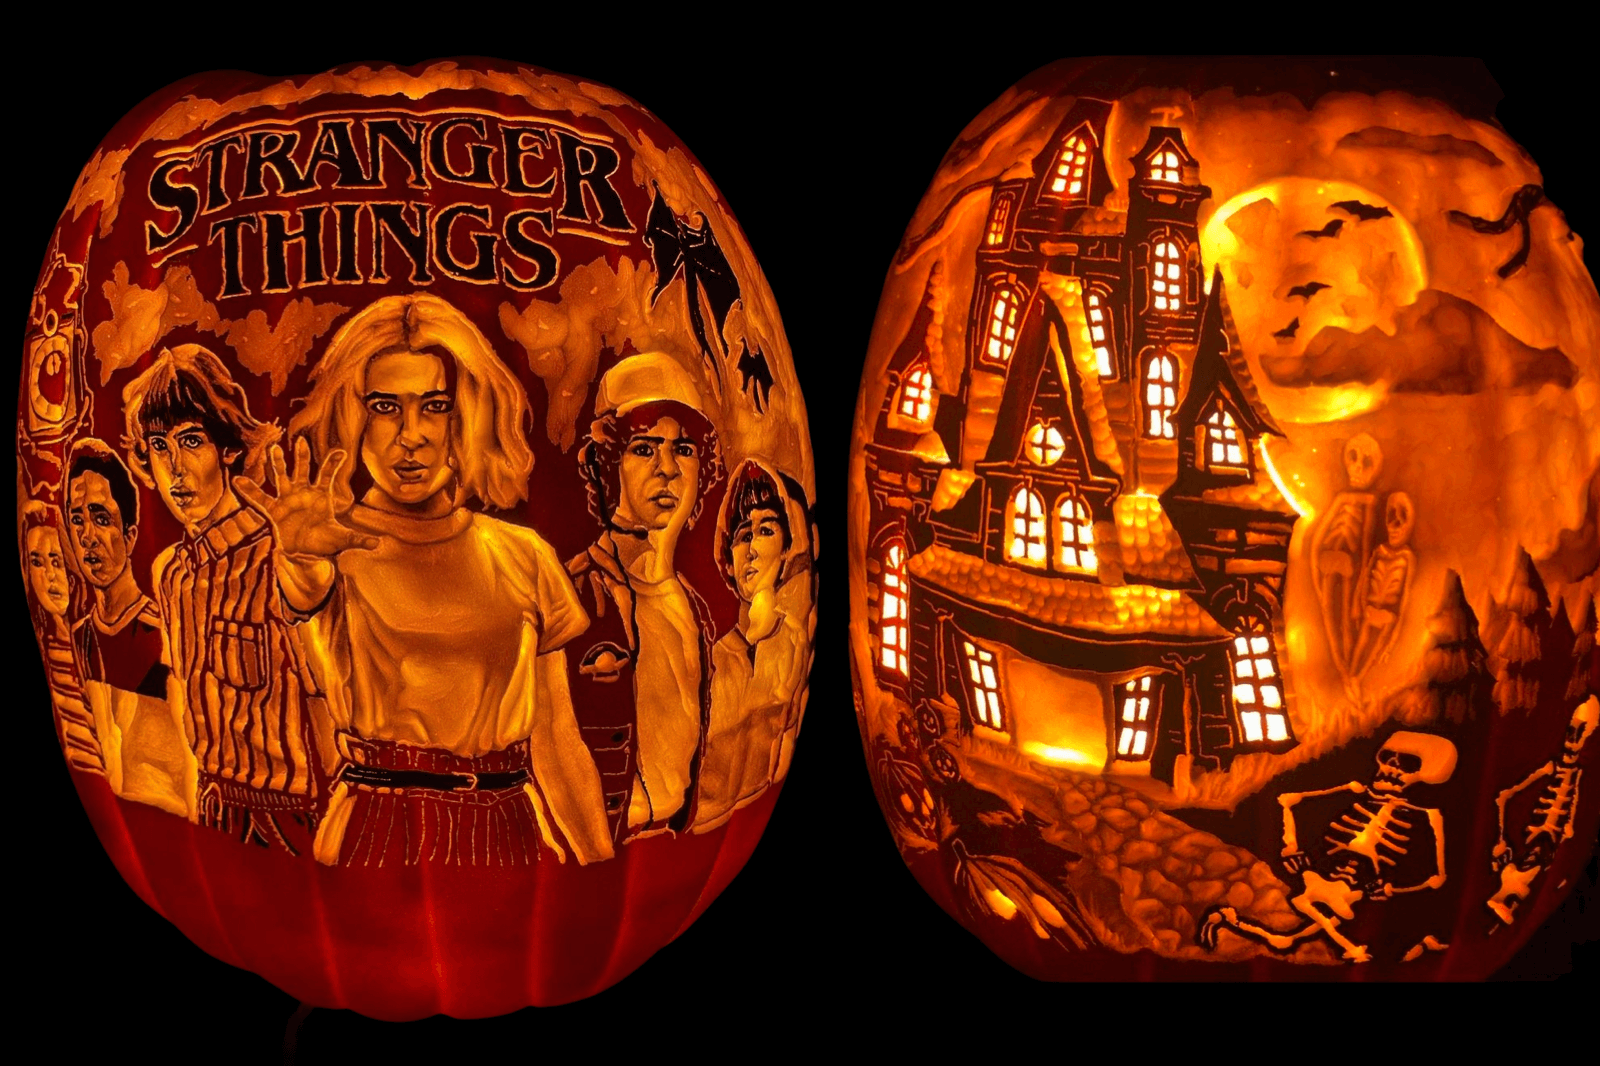 You’ve Never Seen Pumpkins Carved Like This!